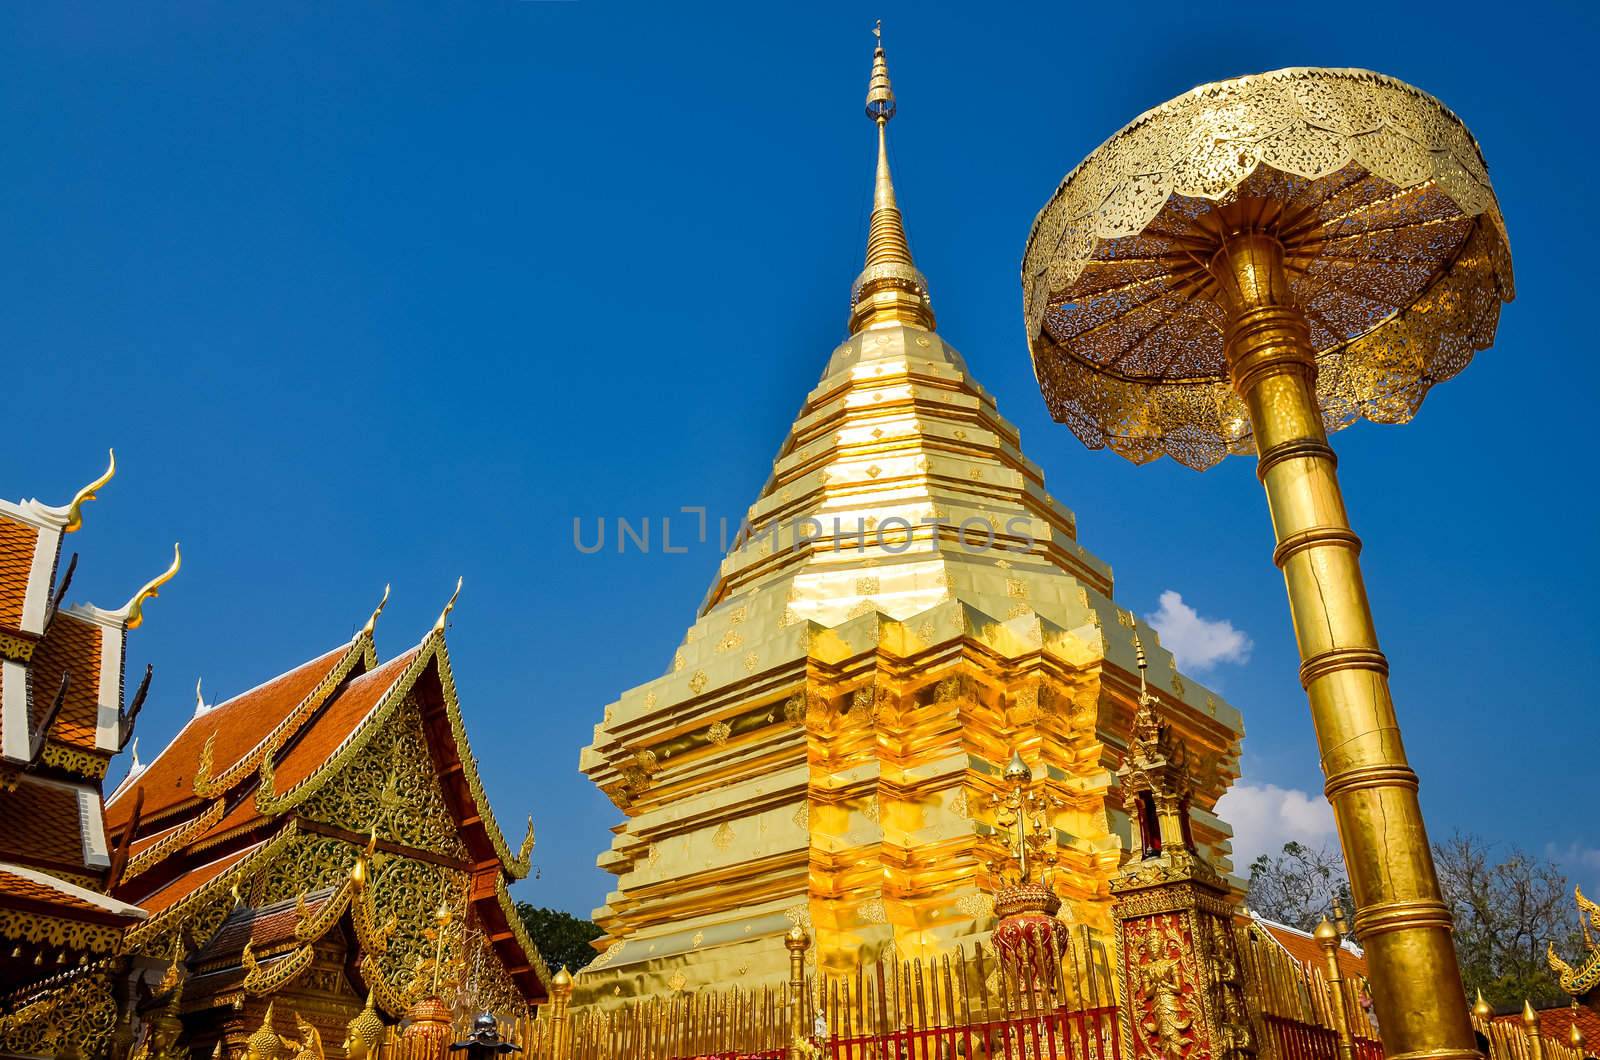 Golden temple Wat phra That in Doi Suthep, Chiang Mai, Thailand by martinm303